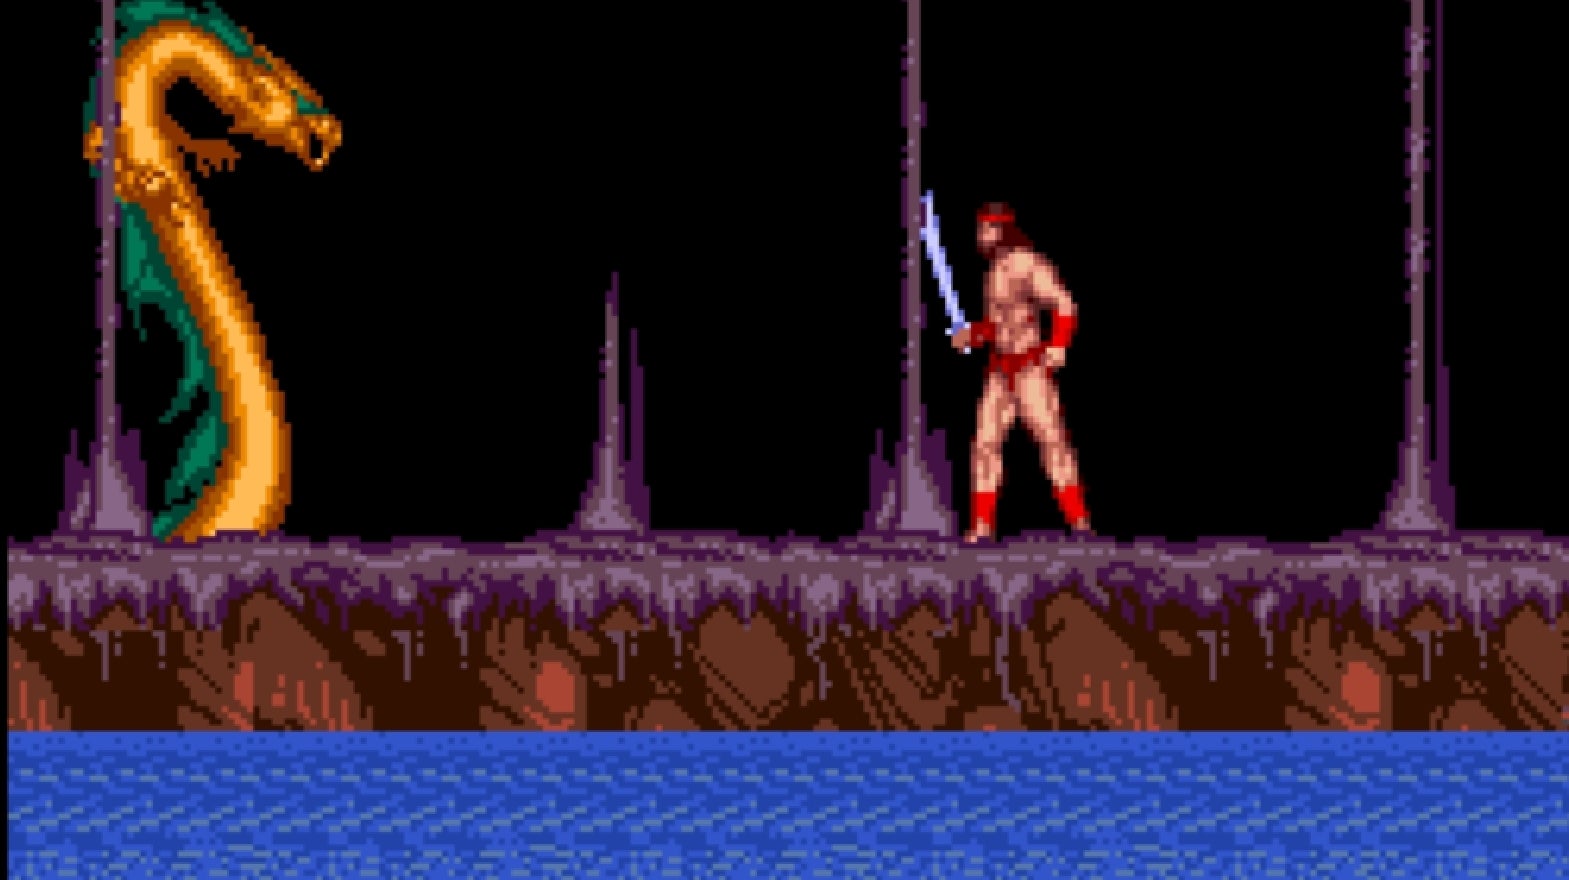 Image for Video: "Kingdom of Death", Auday Hussein's Gilgamesh-inspired Amiga game